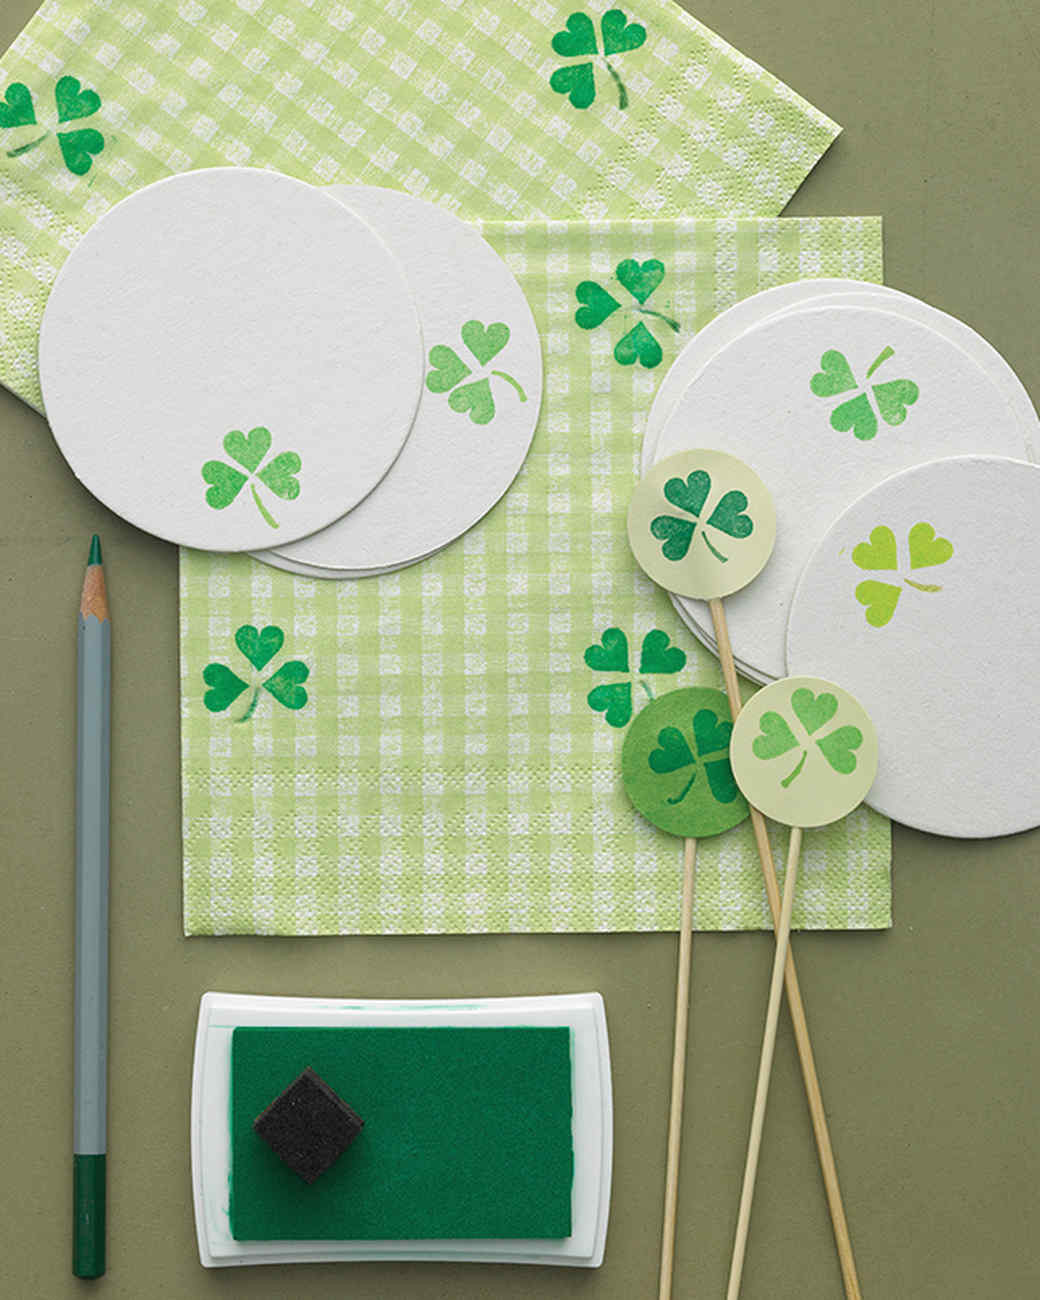 St Patrick Day Crafts
 The Best St Patrick s Day Crafts and Decorations